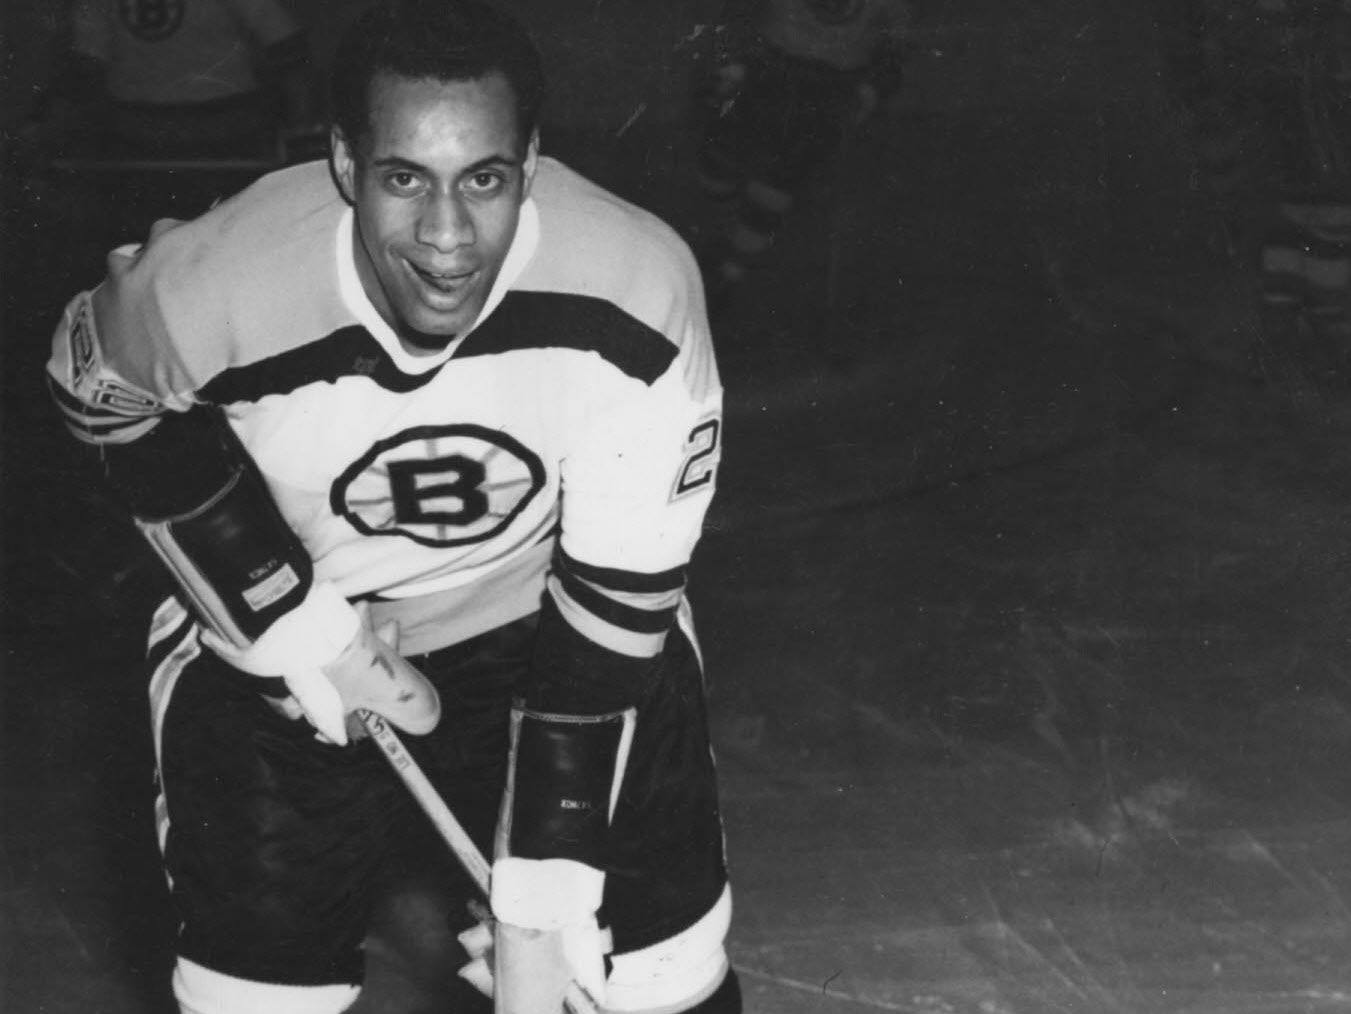 Hockey trailblazer Willie O'Ree sees all obstacles in front of him… and  with just one good eye – New York Daily News